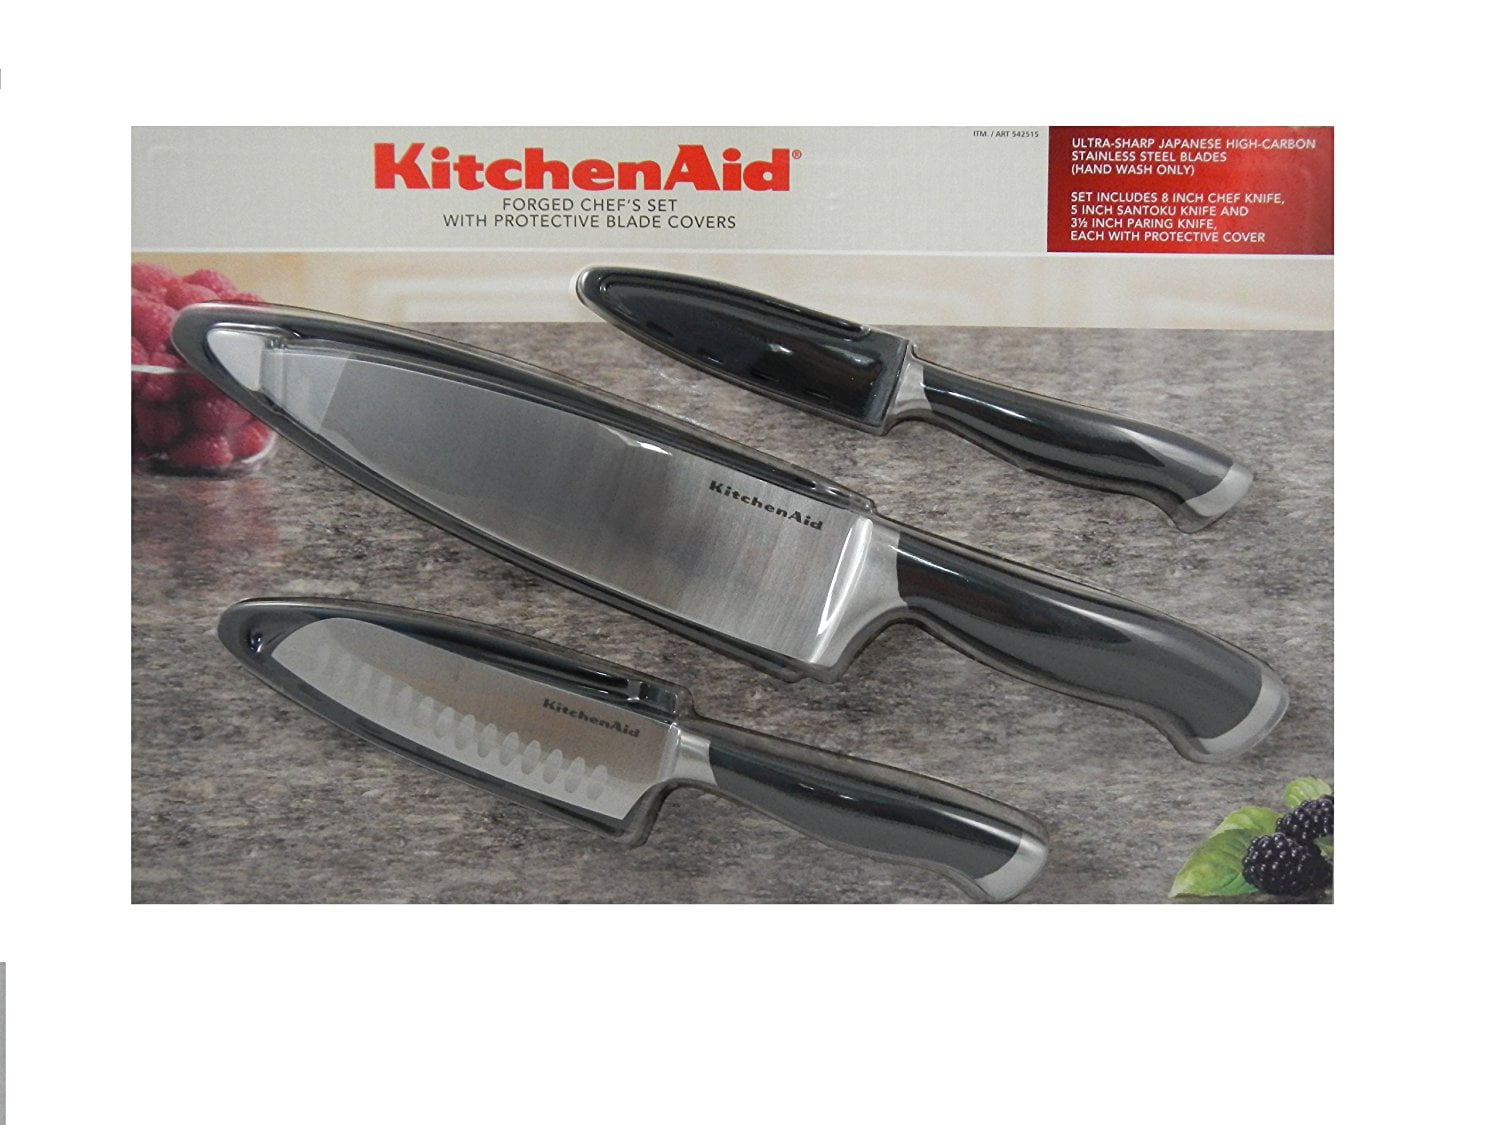 KitchenAid 3 Knives Forged High Carbon Stainless Steel Chef's Set Kitchenaid Knife Set Stainless Steel